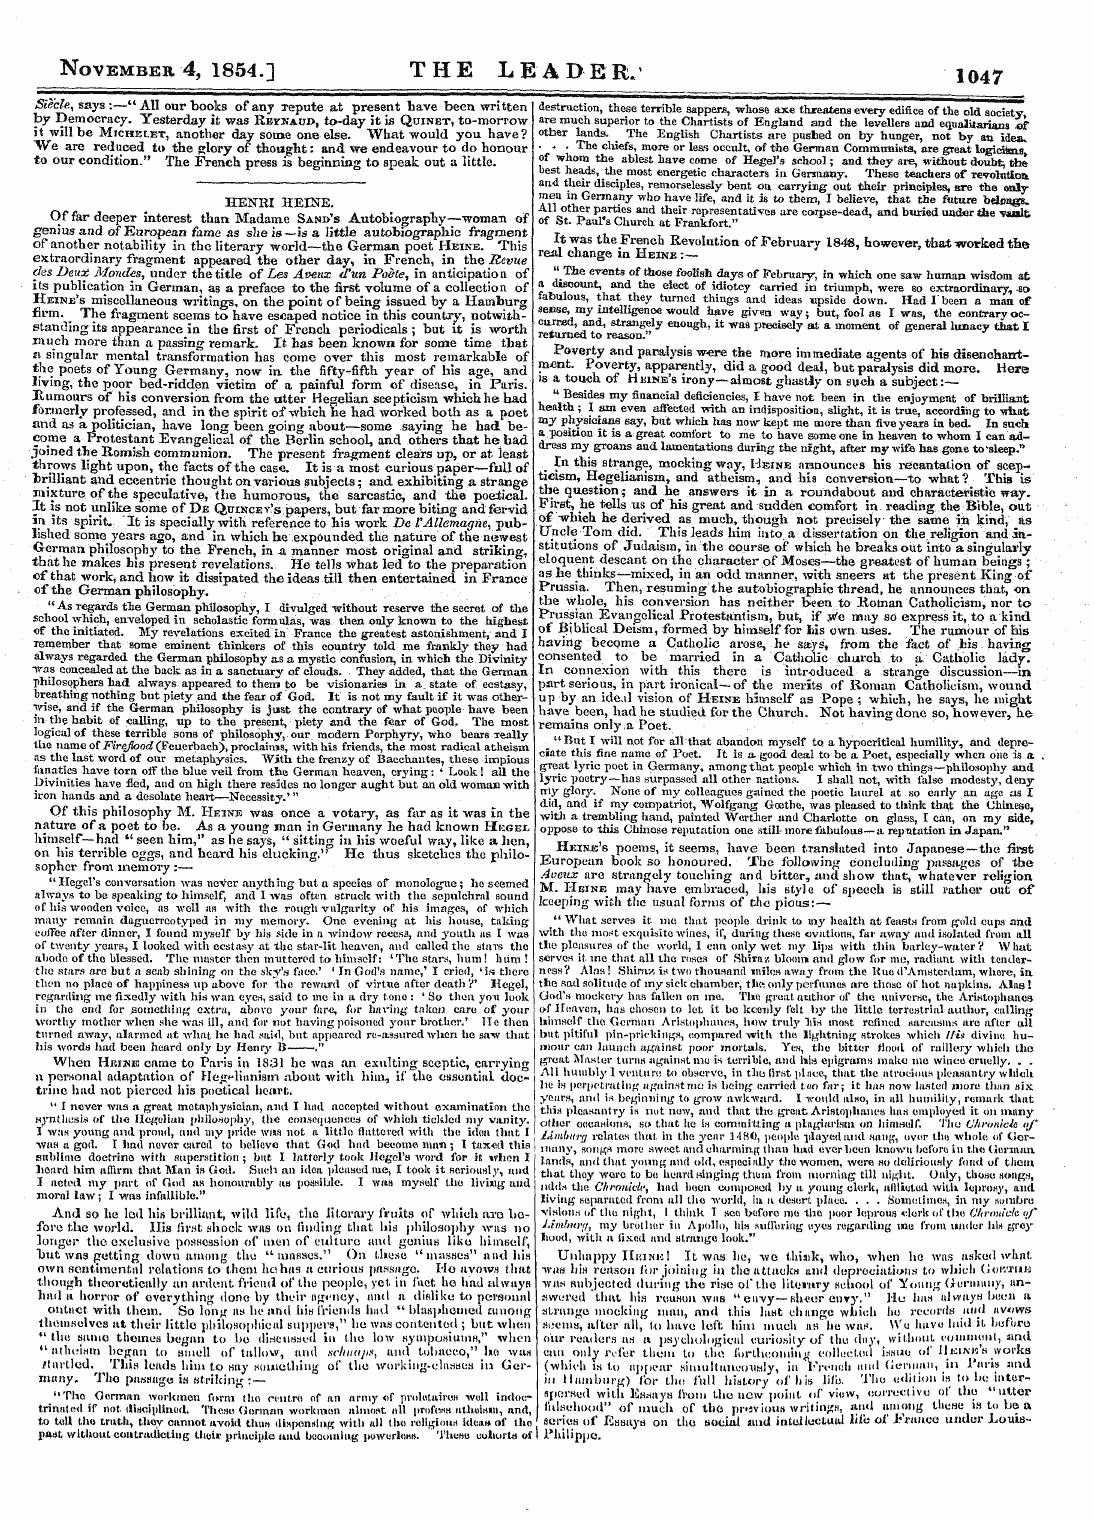 Leader (1850-1860): jS F Y, Country edition - November 4, 1854.] The Leader/ 1047